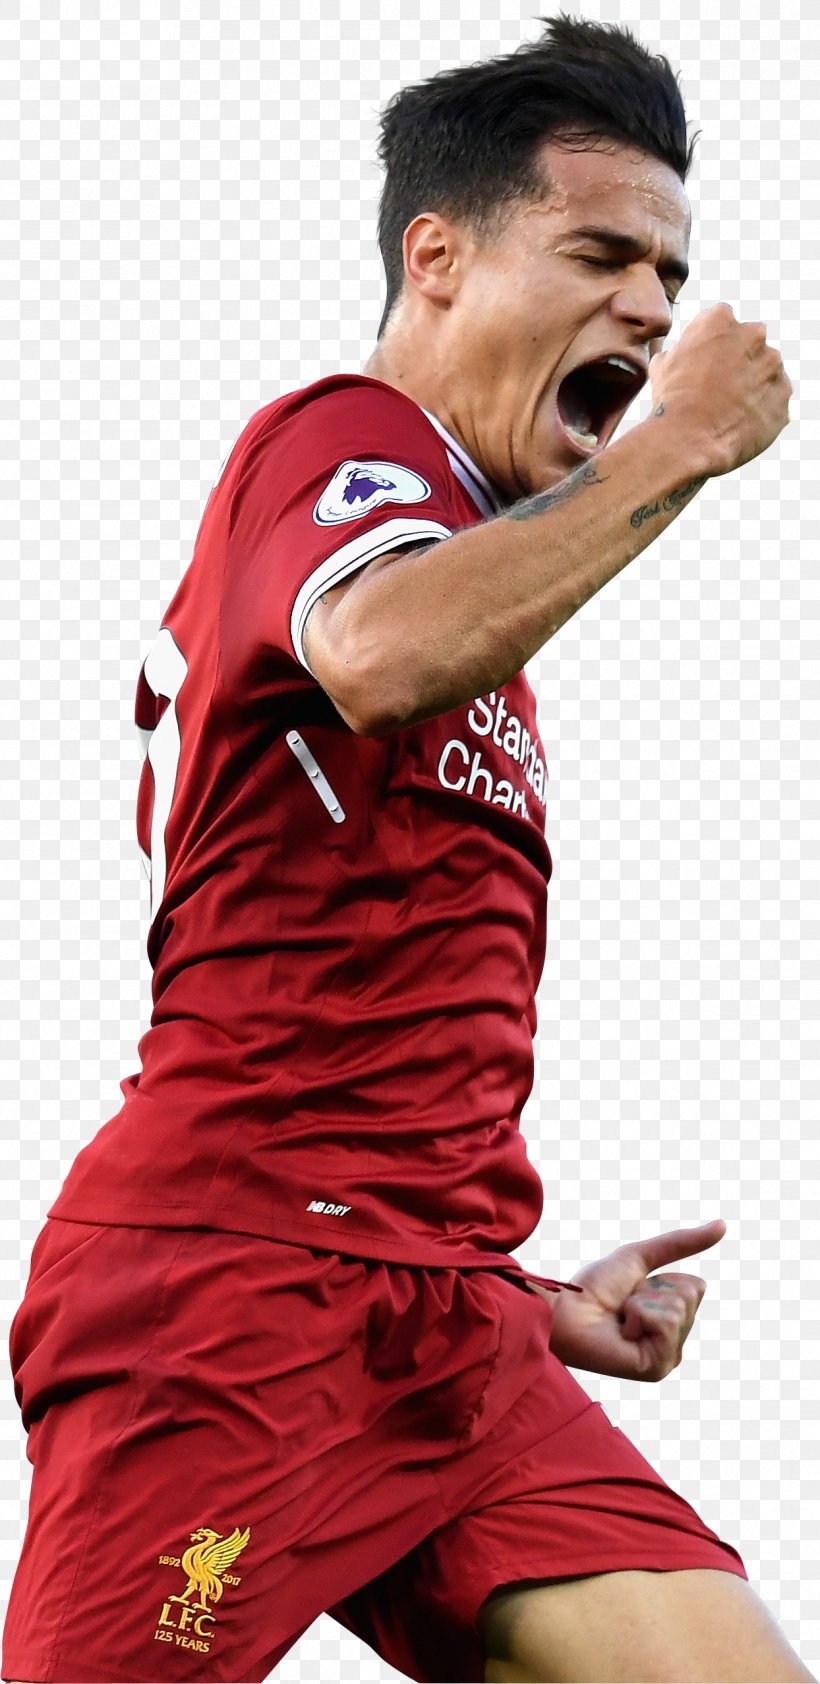 Philippe Coutinho Jersey Football Player ユニフォーム, PNG, 1244x2556px, 2017, Philippe Coutinho, Deviantart, Football, Football Player Download Free